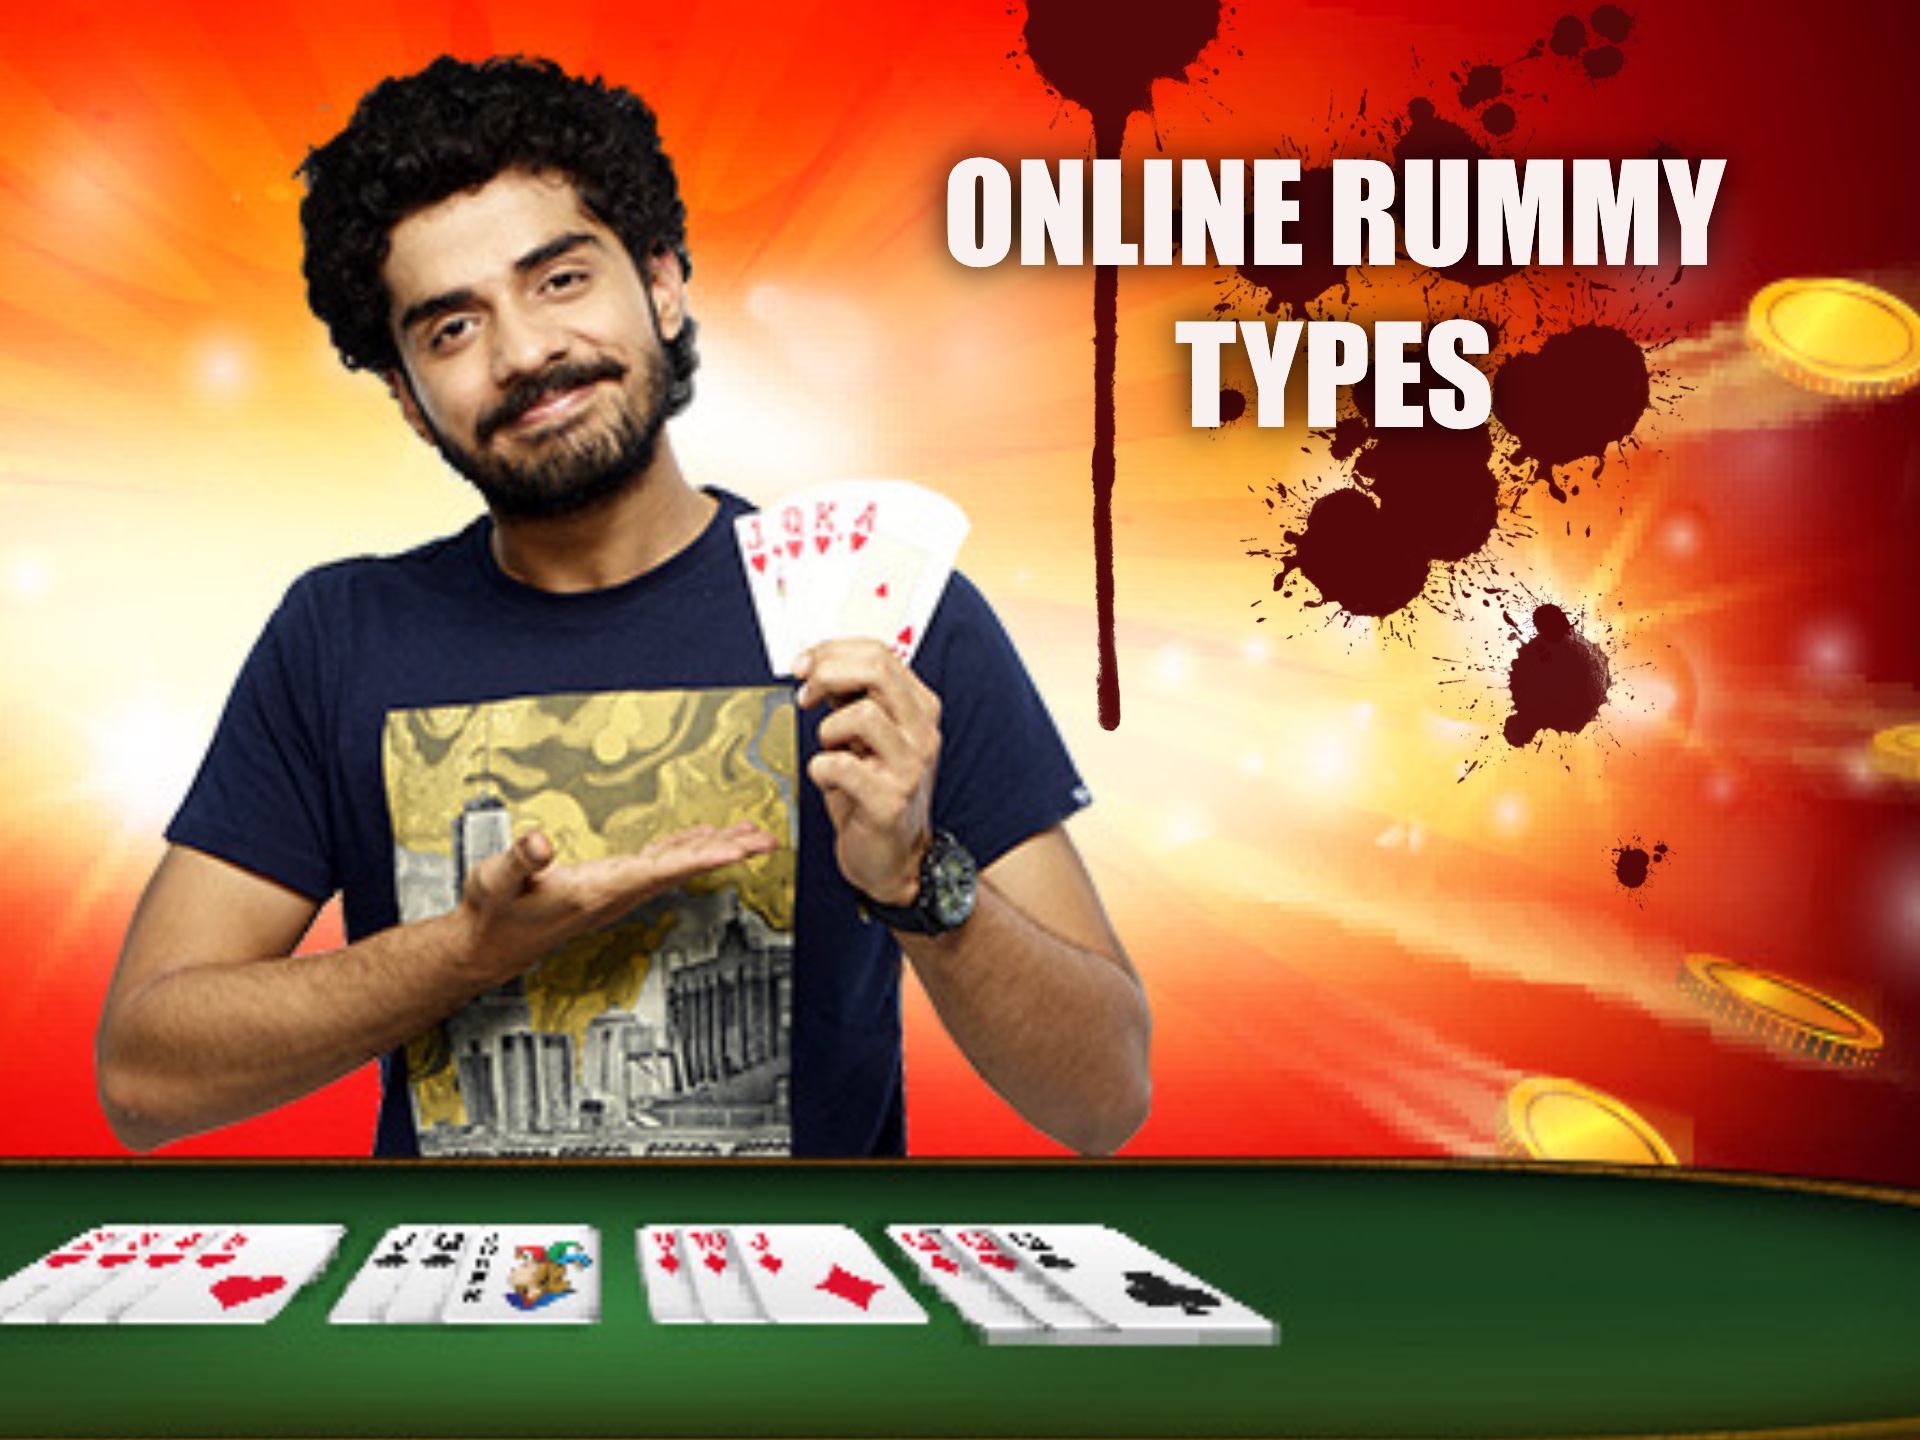 Choose the best rummy type to play online